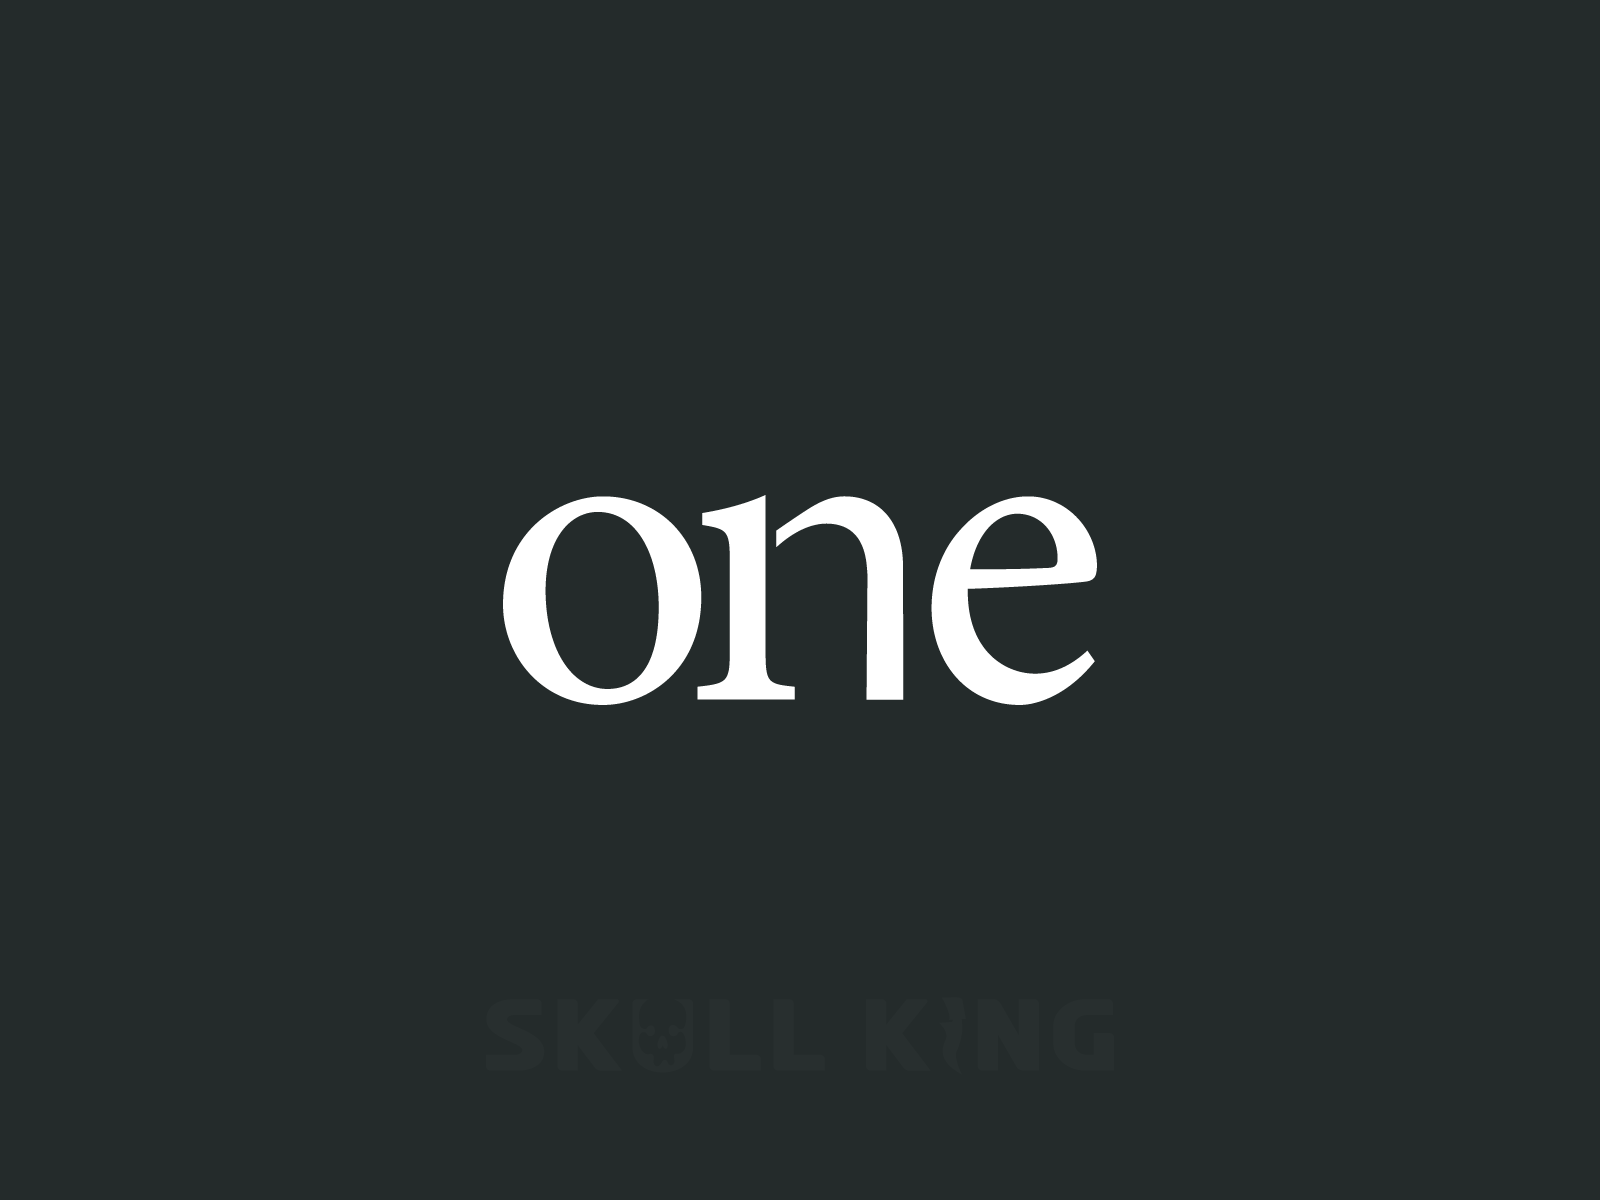 One Logo by Skull King on Dribbble